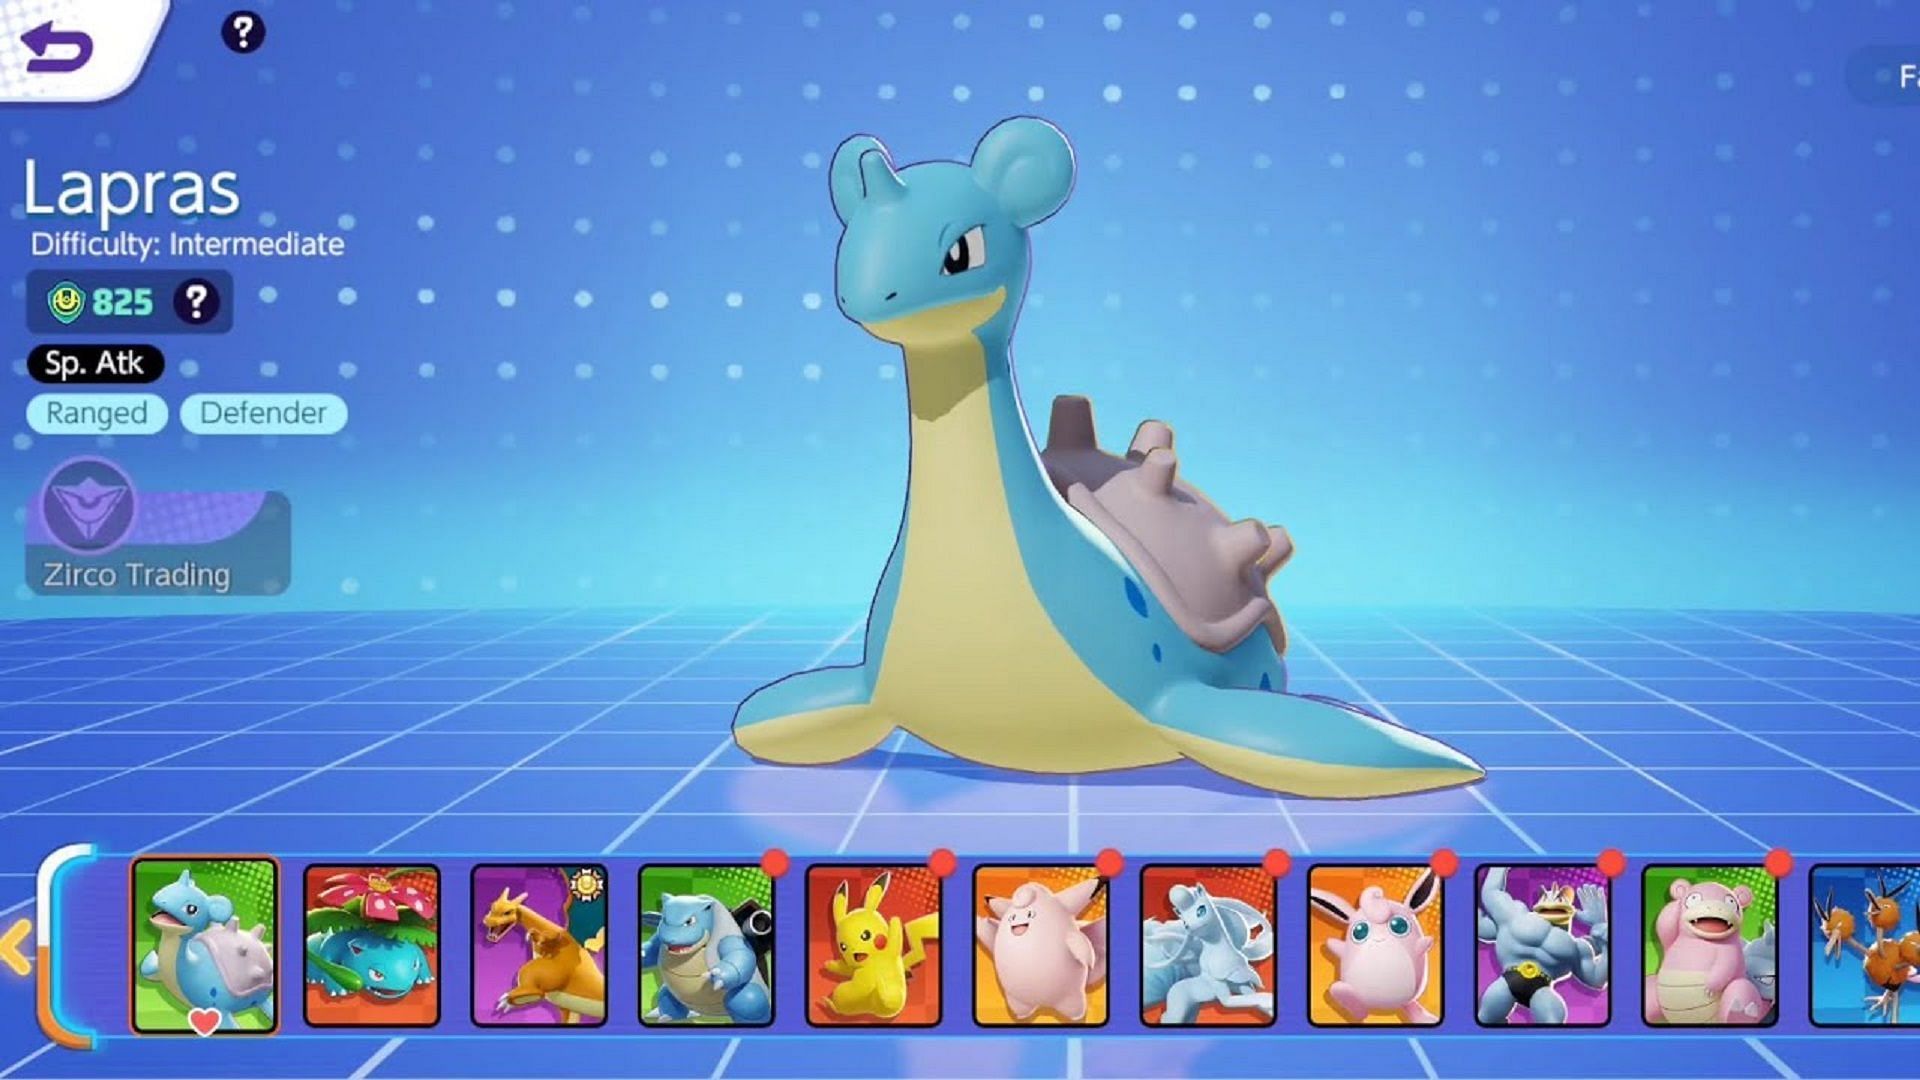 Lapras is joining Goodra as one of the latest Unite Licenses in Pokemon Unite (Image via WadaGames/YouTube)